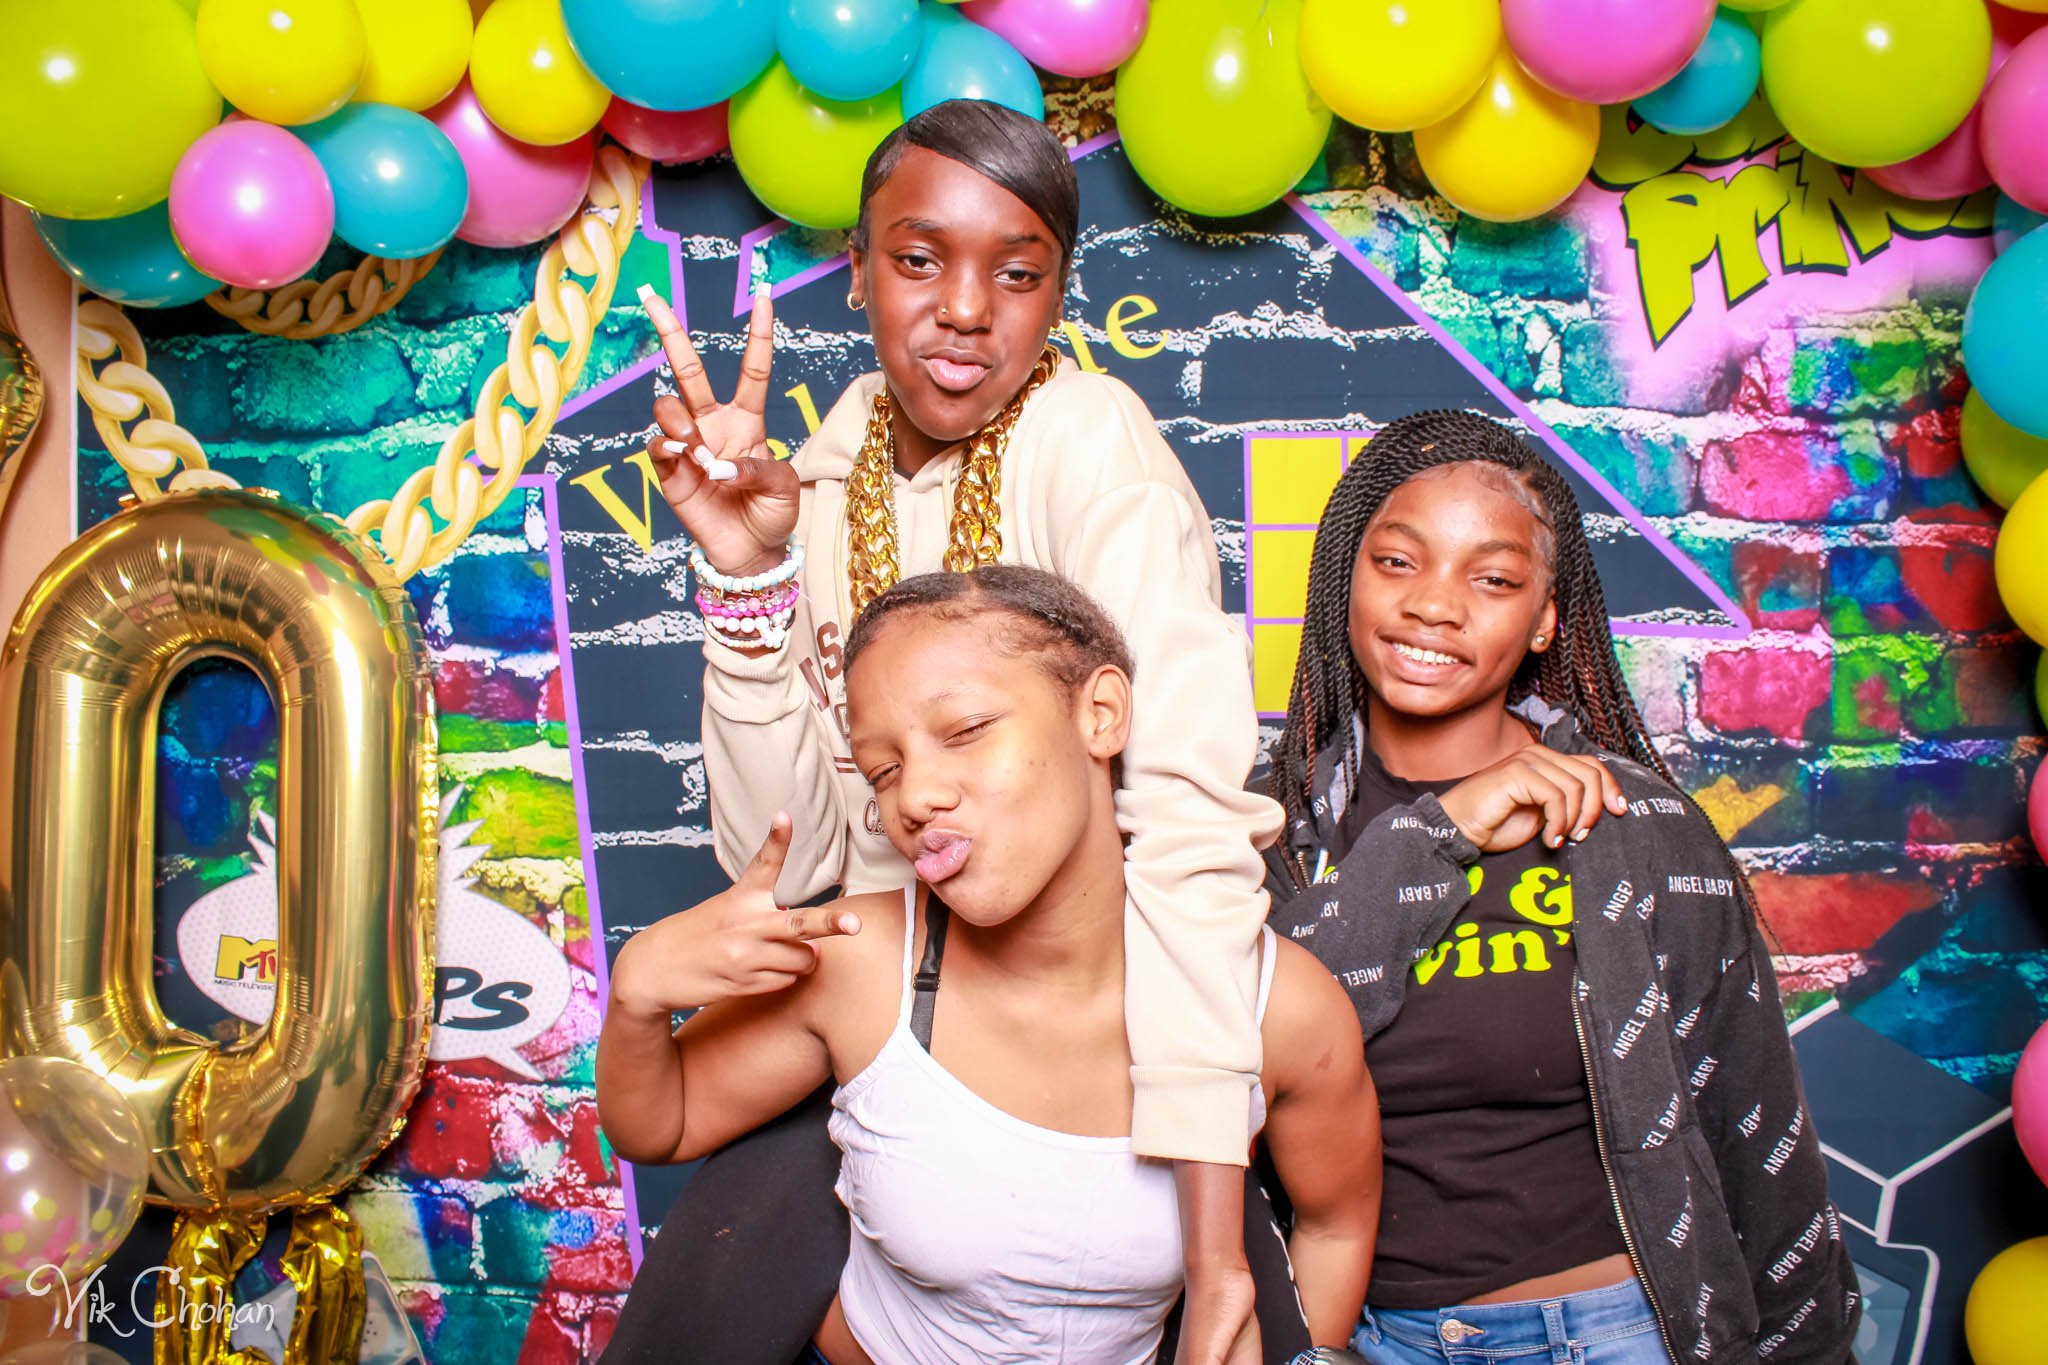 2022-11-26-Fabreonne-40-and-Fabulous-Birthday-House-Party-Photo-Booth-Vik-Chohan-Photography-Photo-Booth-Social-Media-VCP-043.jpg